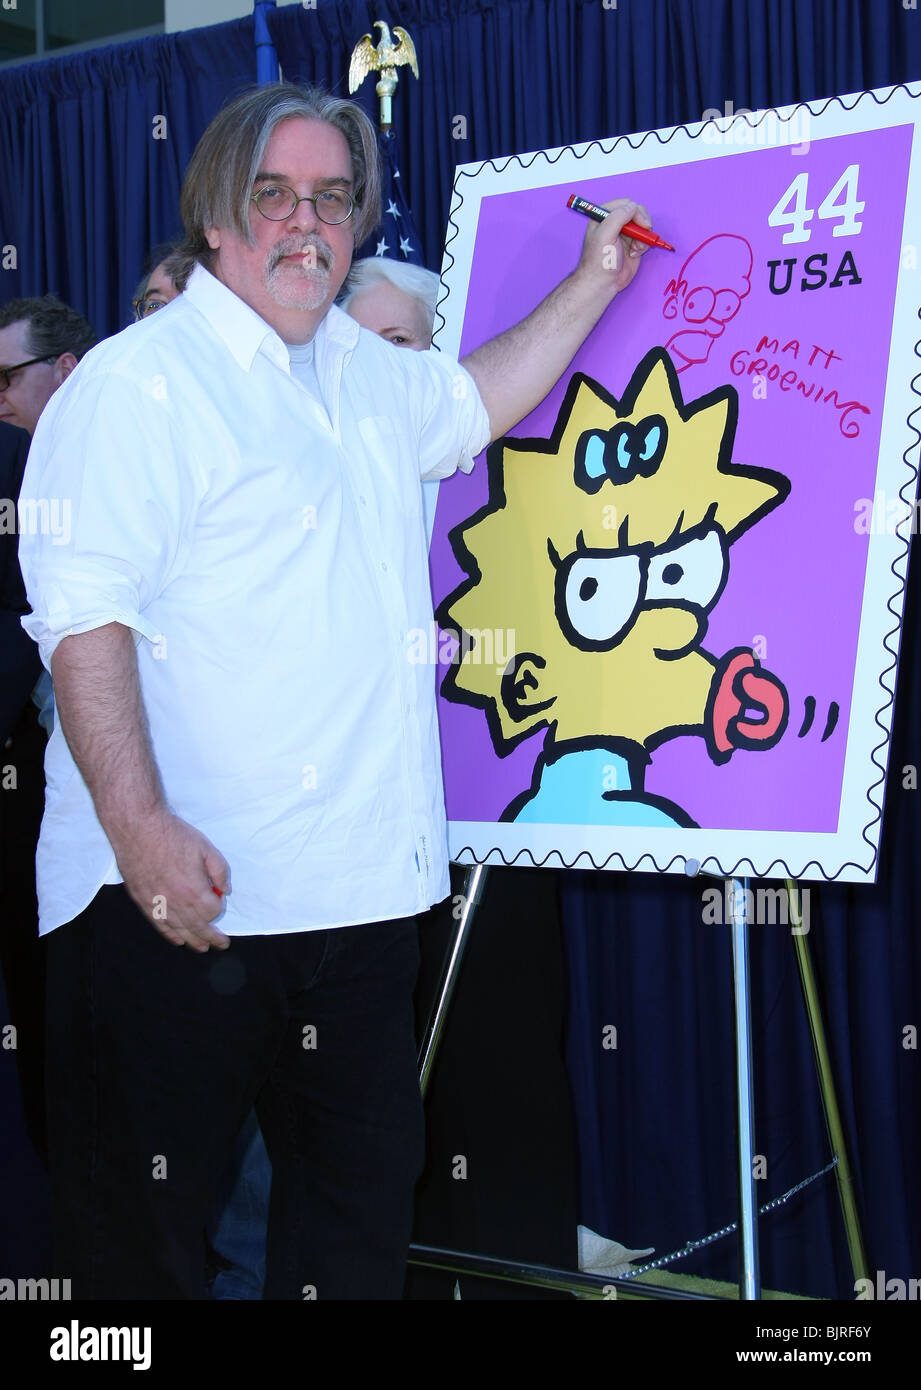 MATT GROENING FIRST DAY ISSUE OF THE SIMPSONS STAMPS US POSTAL SERVICE CENTURY CITY LOS ANGELES CA USA 07 May 2009 Stock Photo